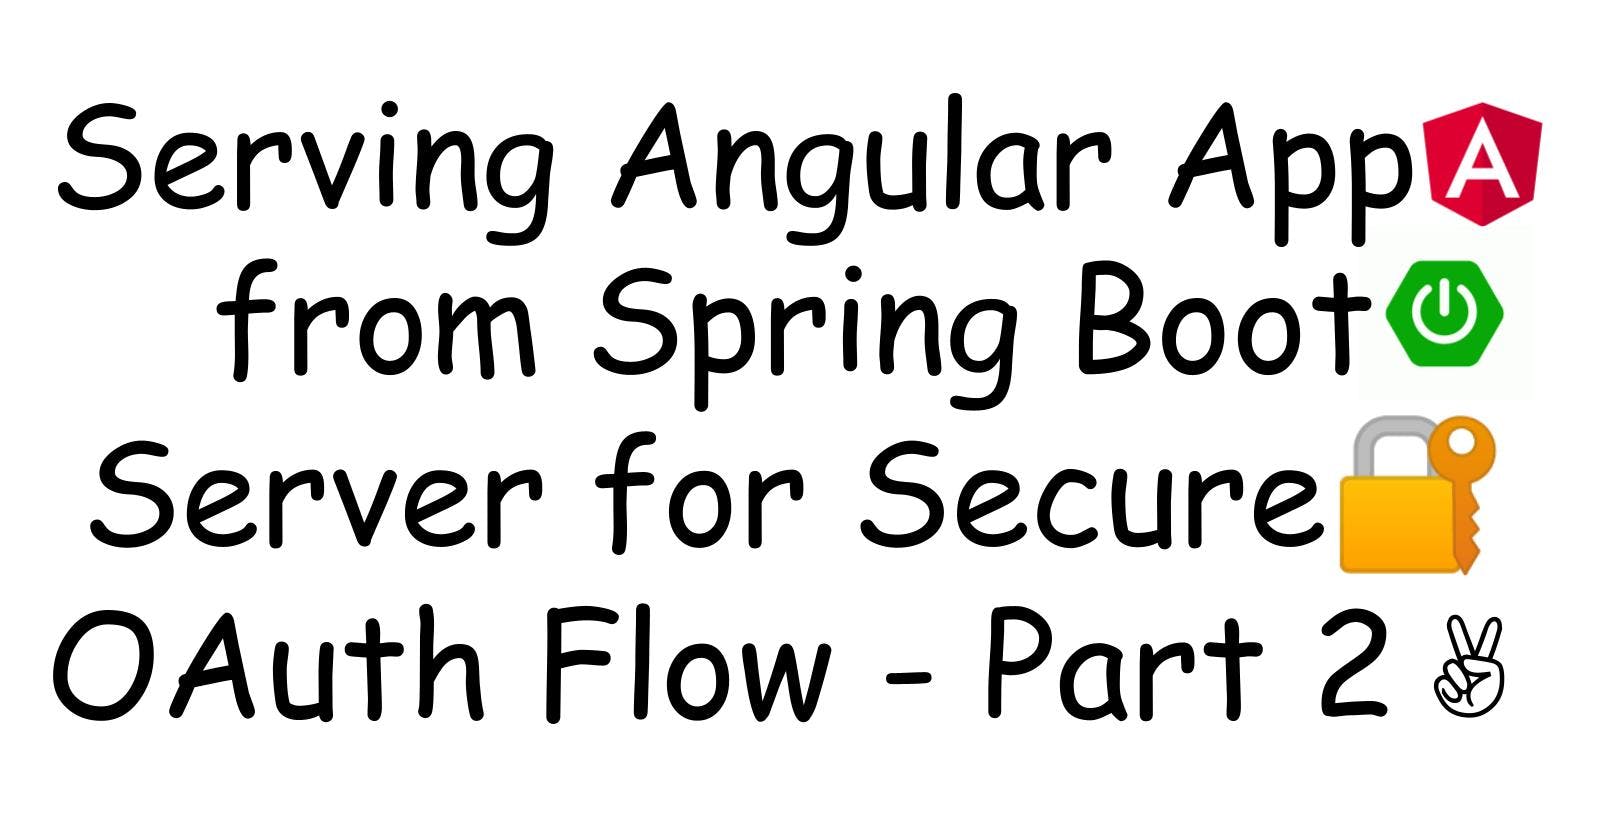 Serving Angular App from Spring Boot Server for Secure 🔐 OAuth Flow - Part 2 ✌